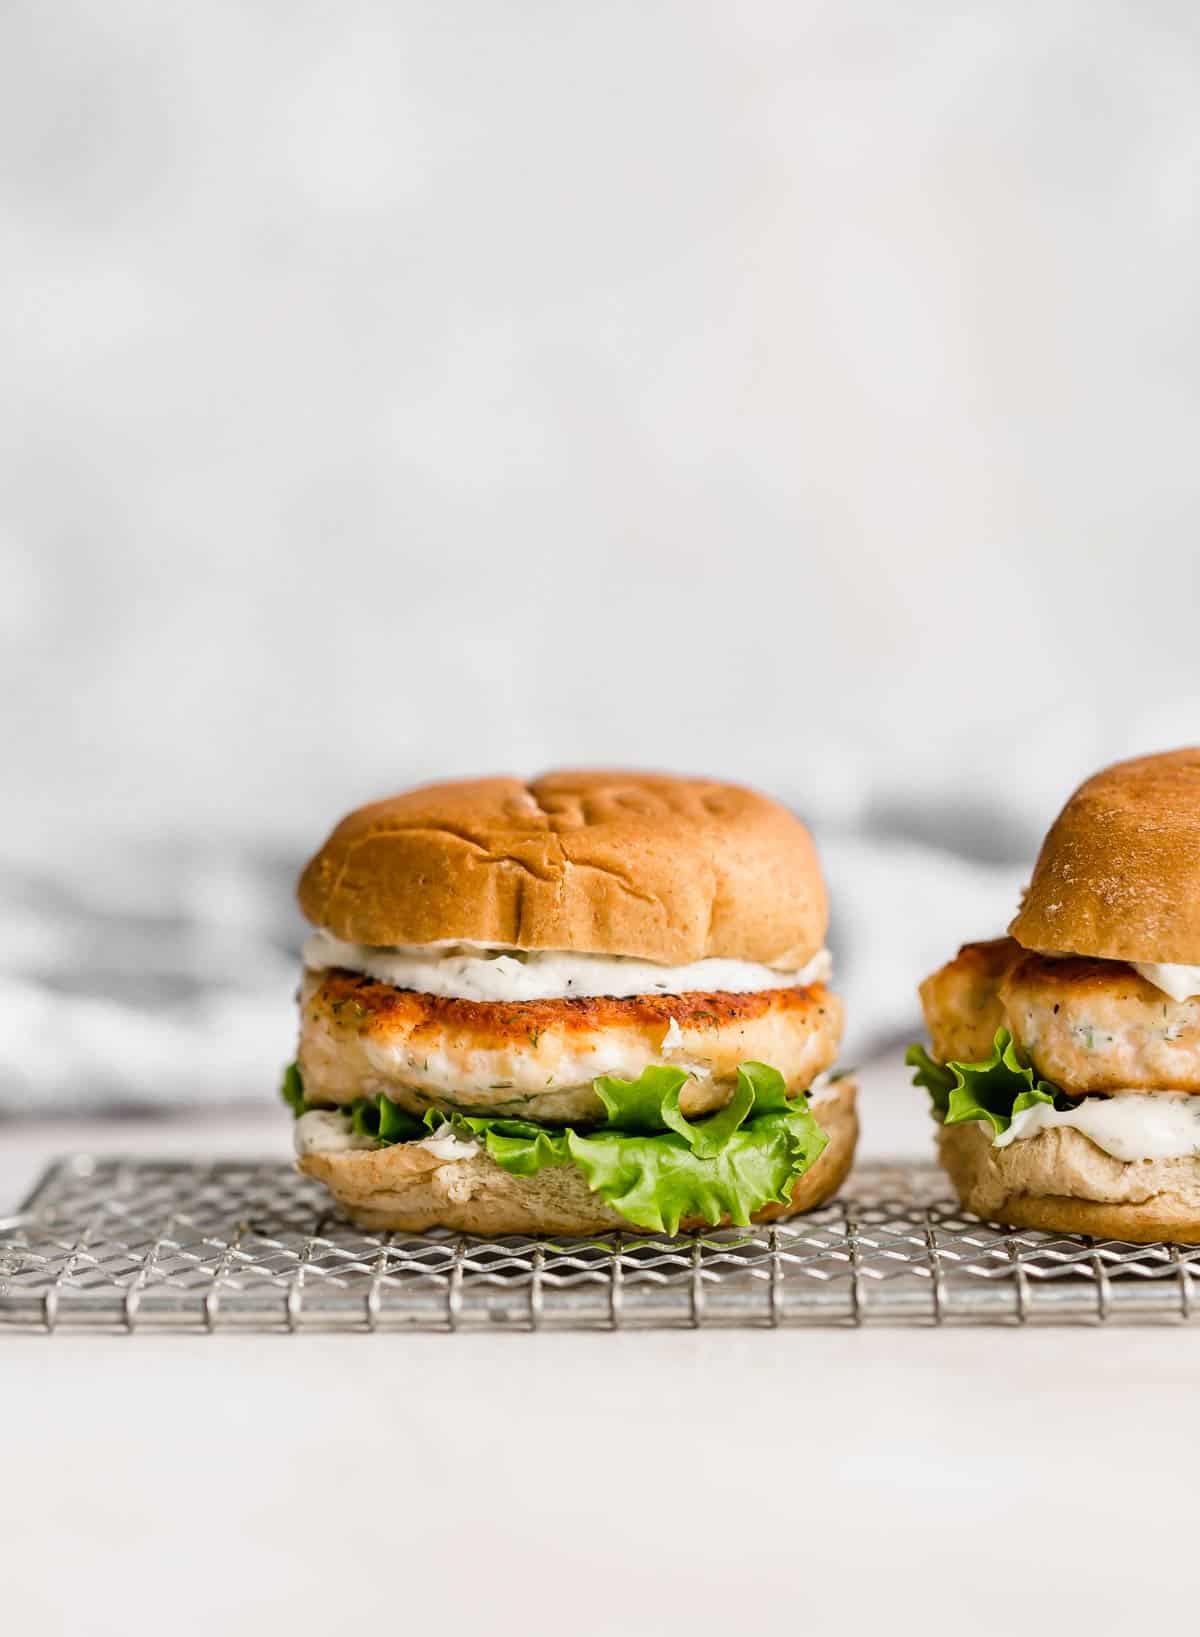 A Salmon Burger on a bun with lettuce and dill sauce.